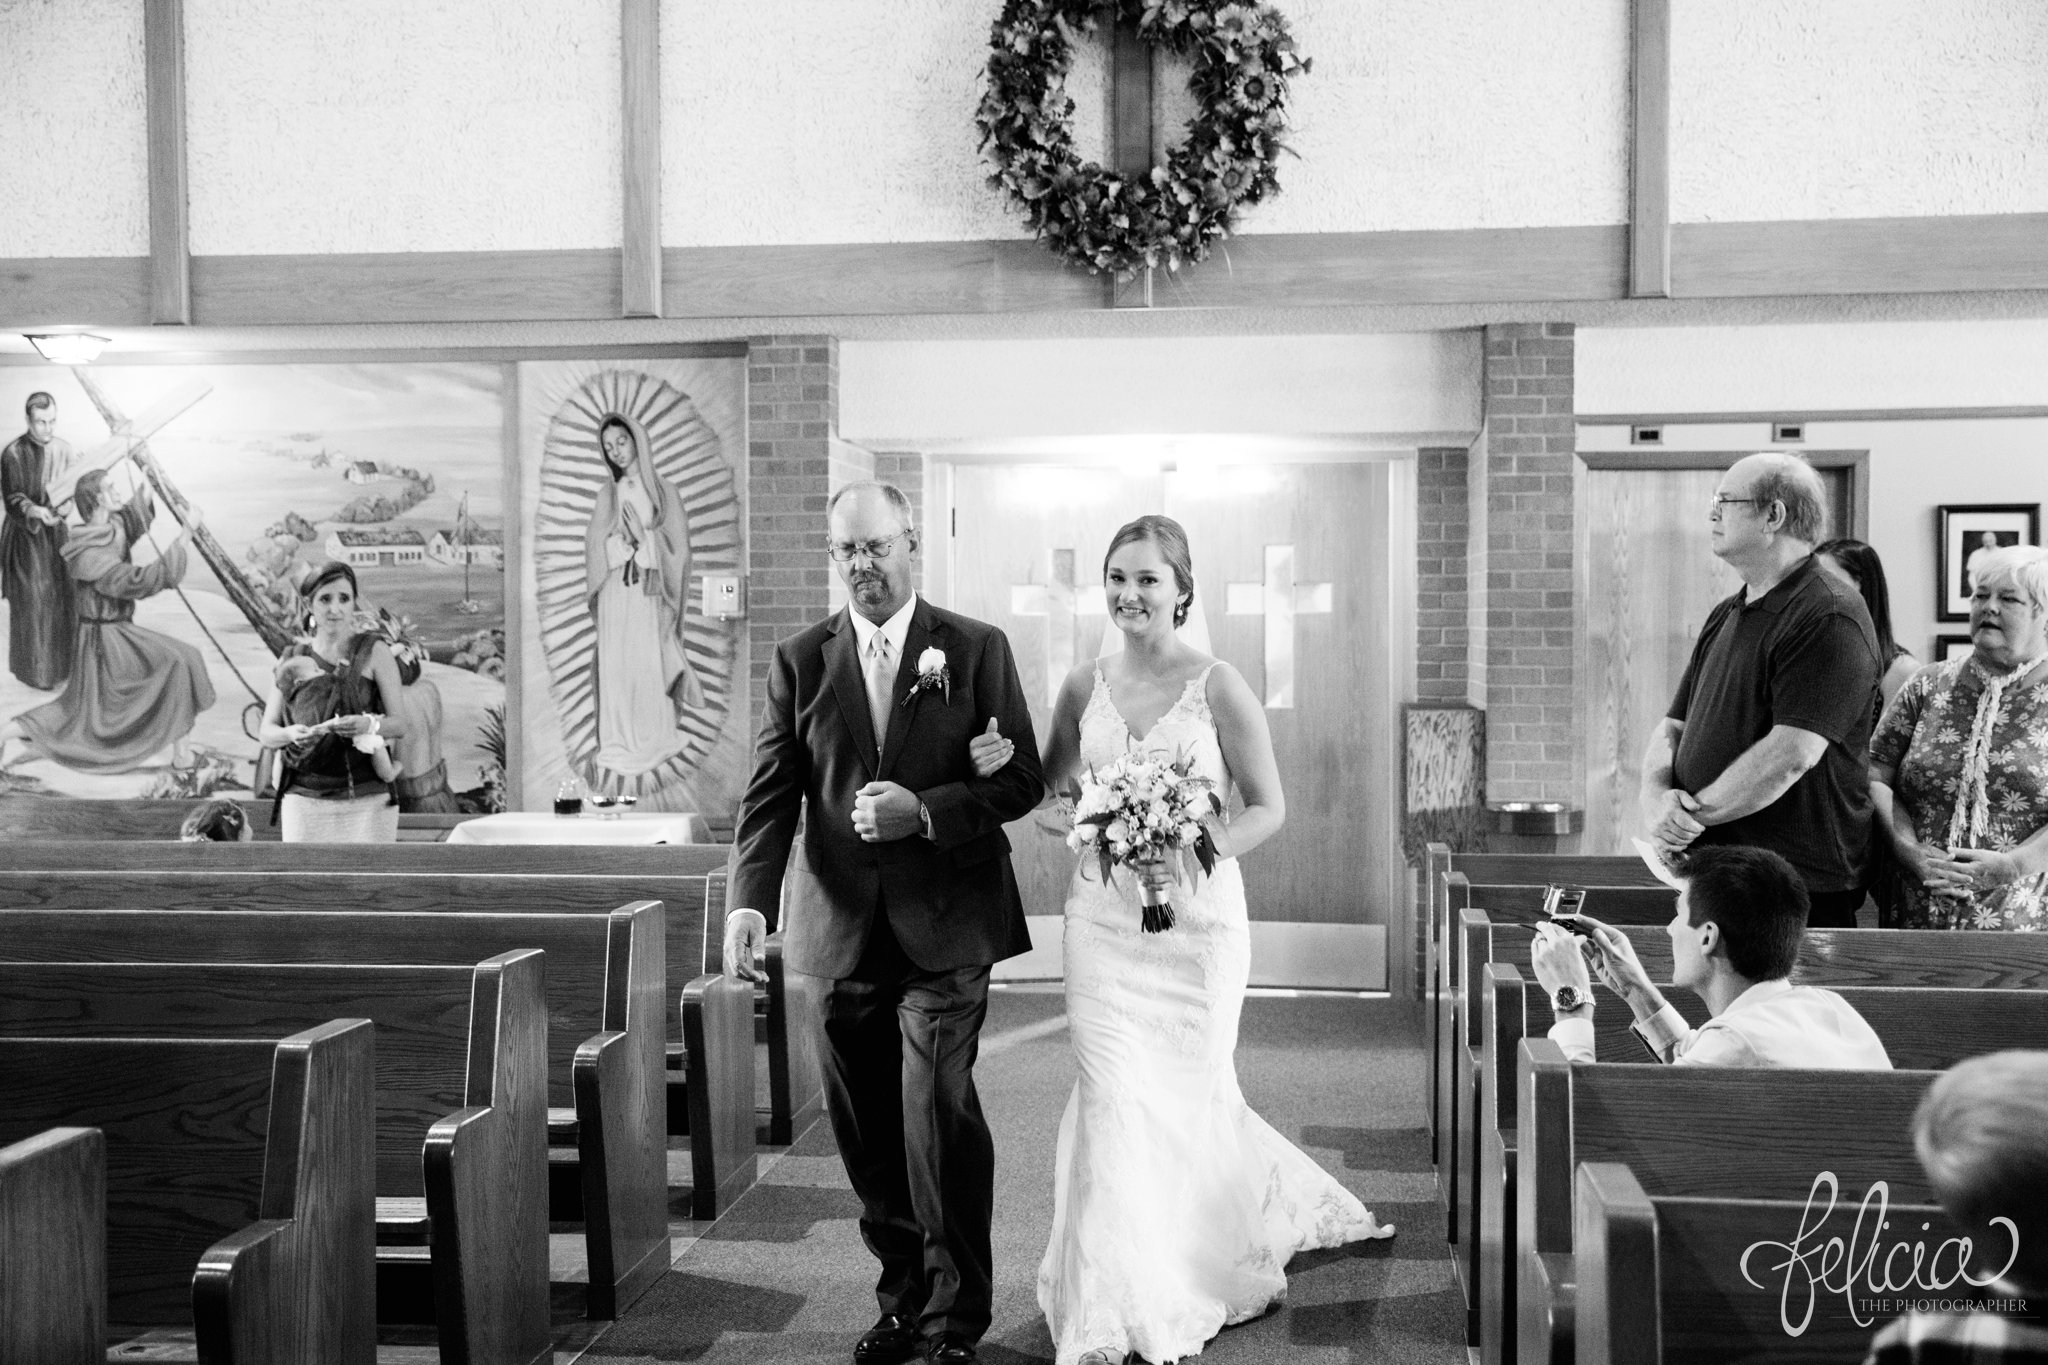 Black and White | Wedding | Wedding Photography | Wedding Photos | Travel Photographer | Images by feliciathephotographer.com | Wedding Ceremony | Sacred Heart Catholic Church | Father of the Bride | Walking Down the Aisle | Here Comes the Bride 